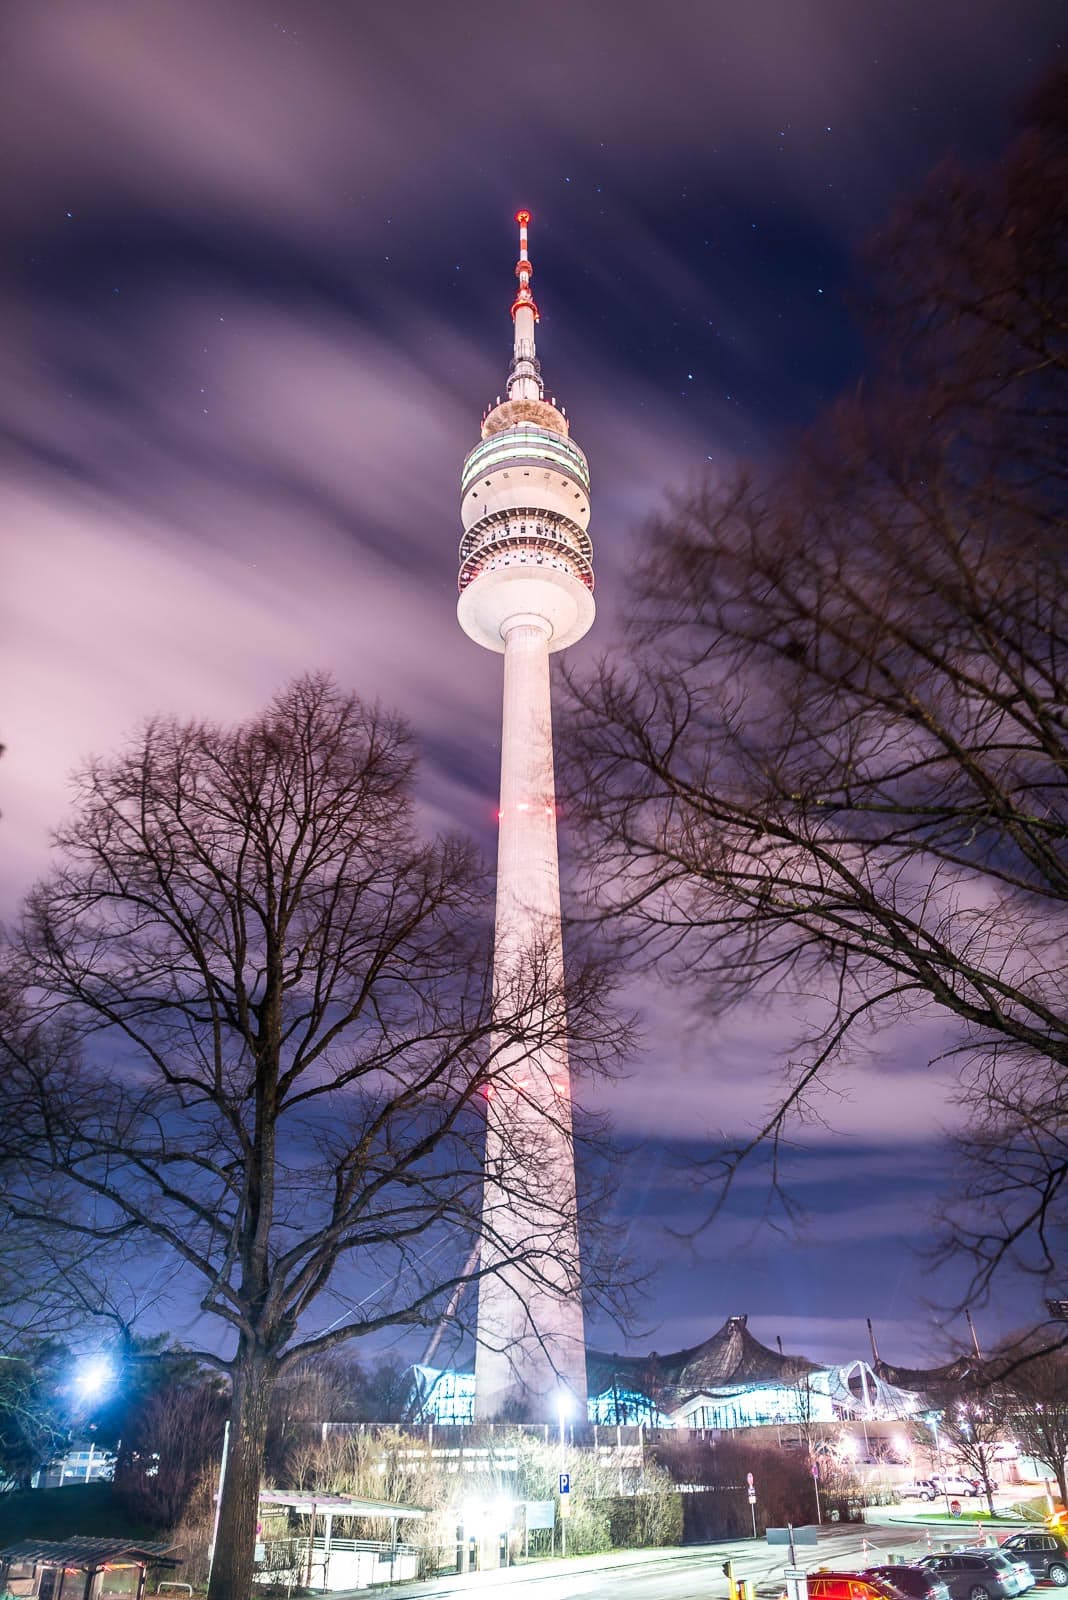 Olympic Tower at night in Munich